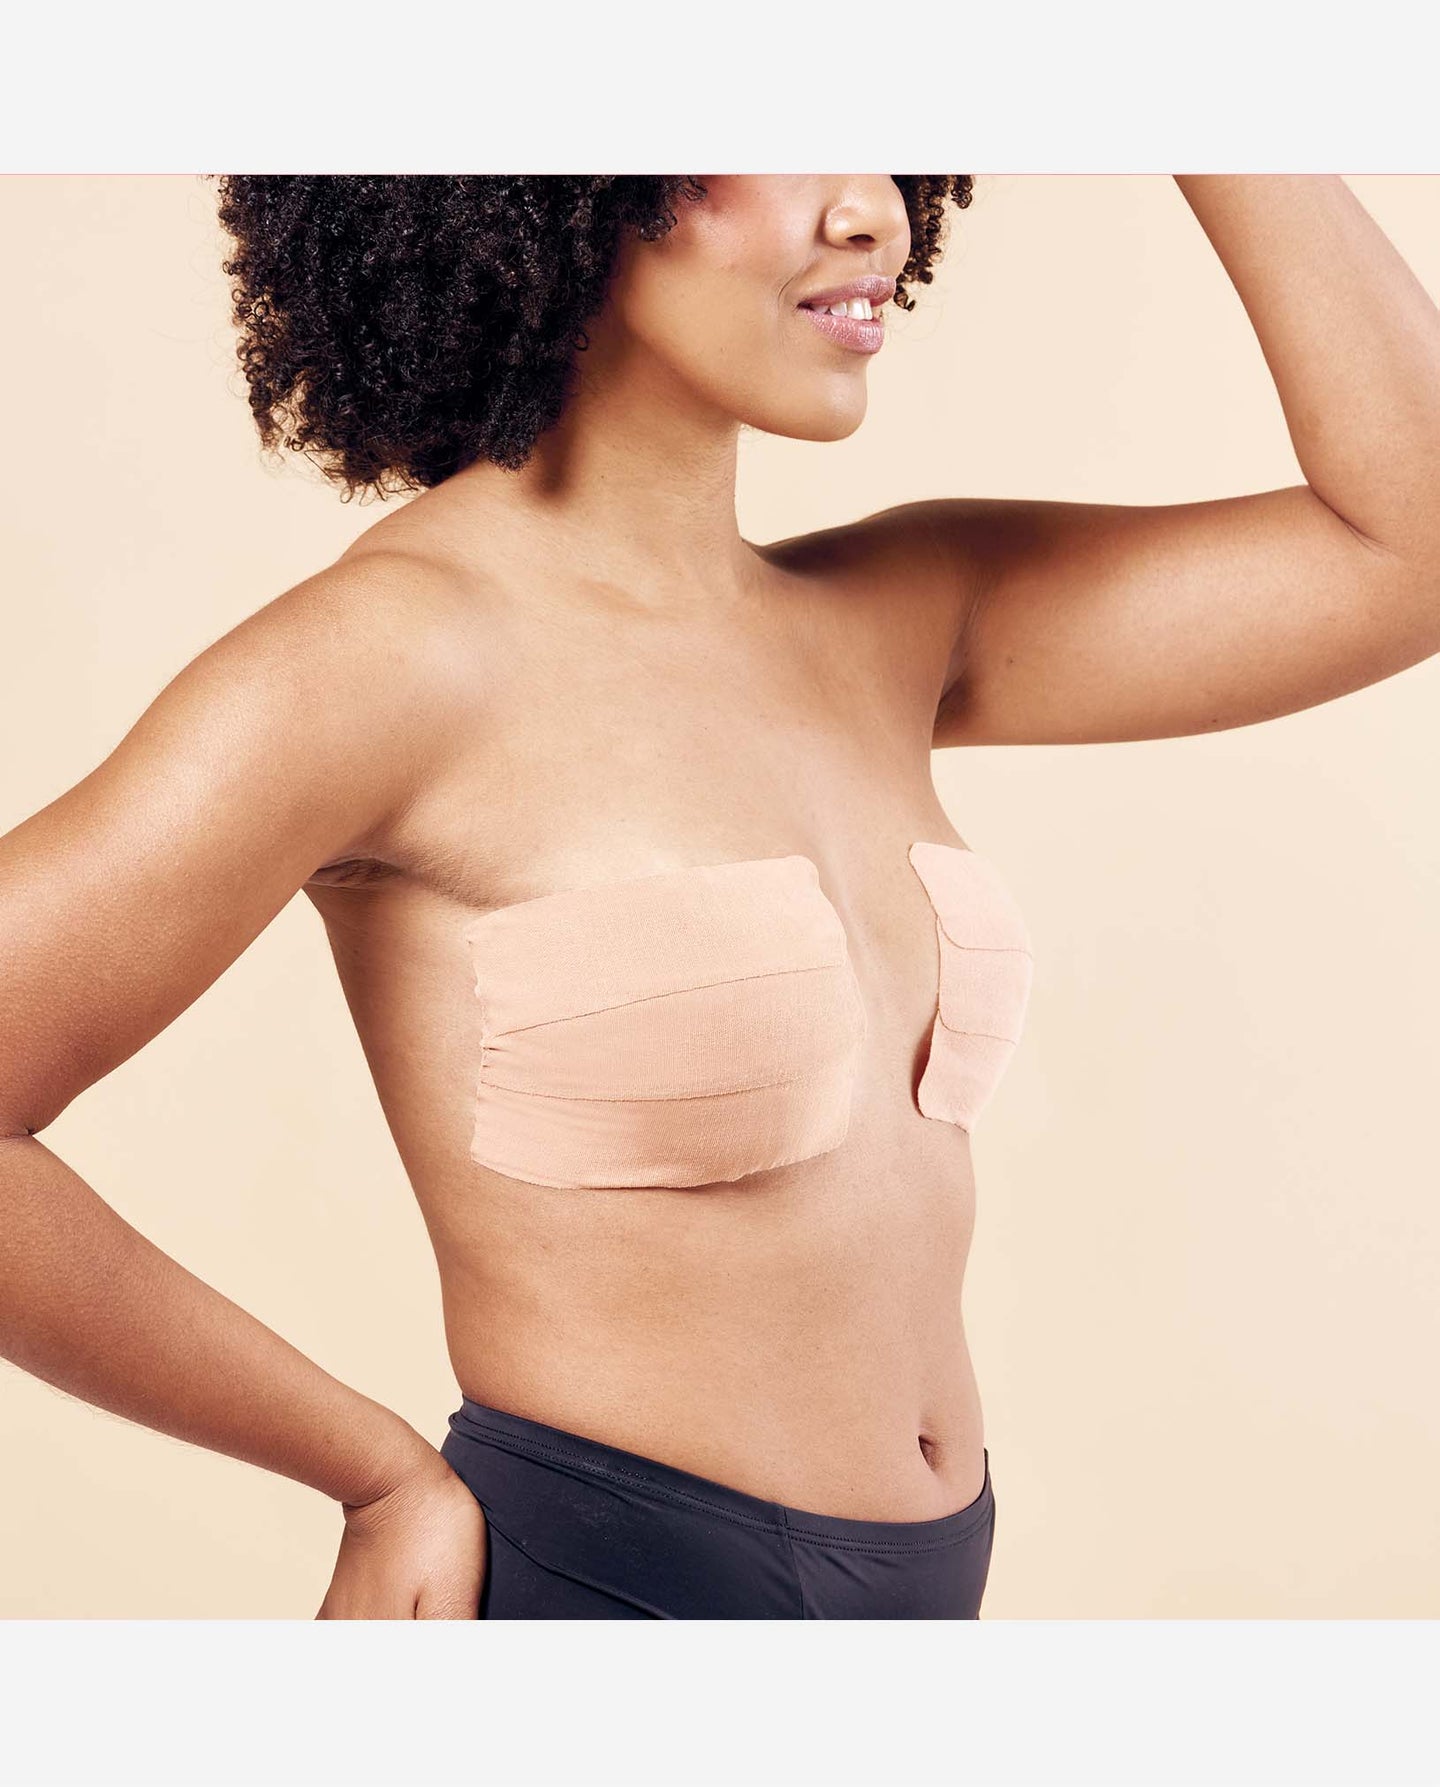 How to use body tape for a backless dress #bodytape #tryrisque #bodyta